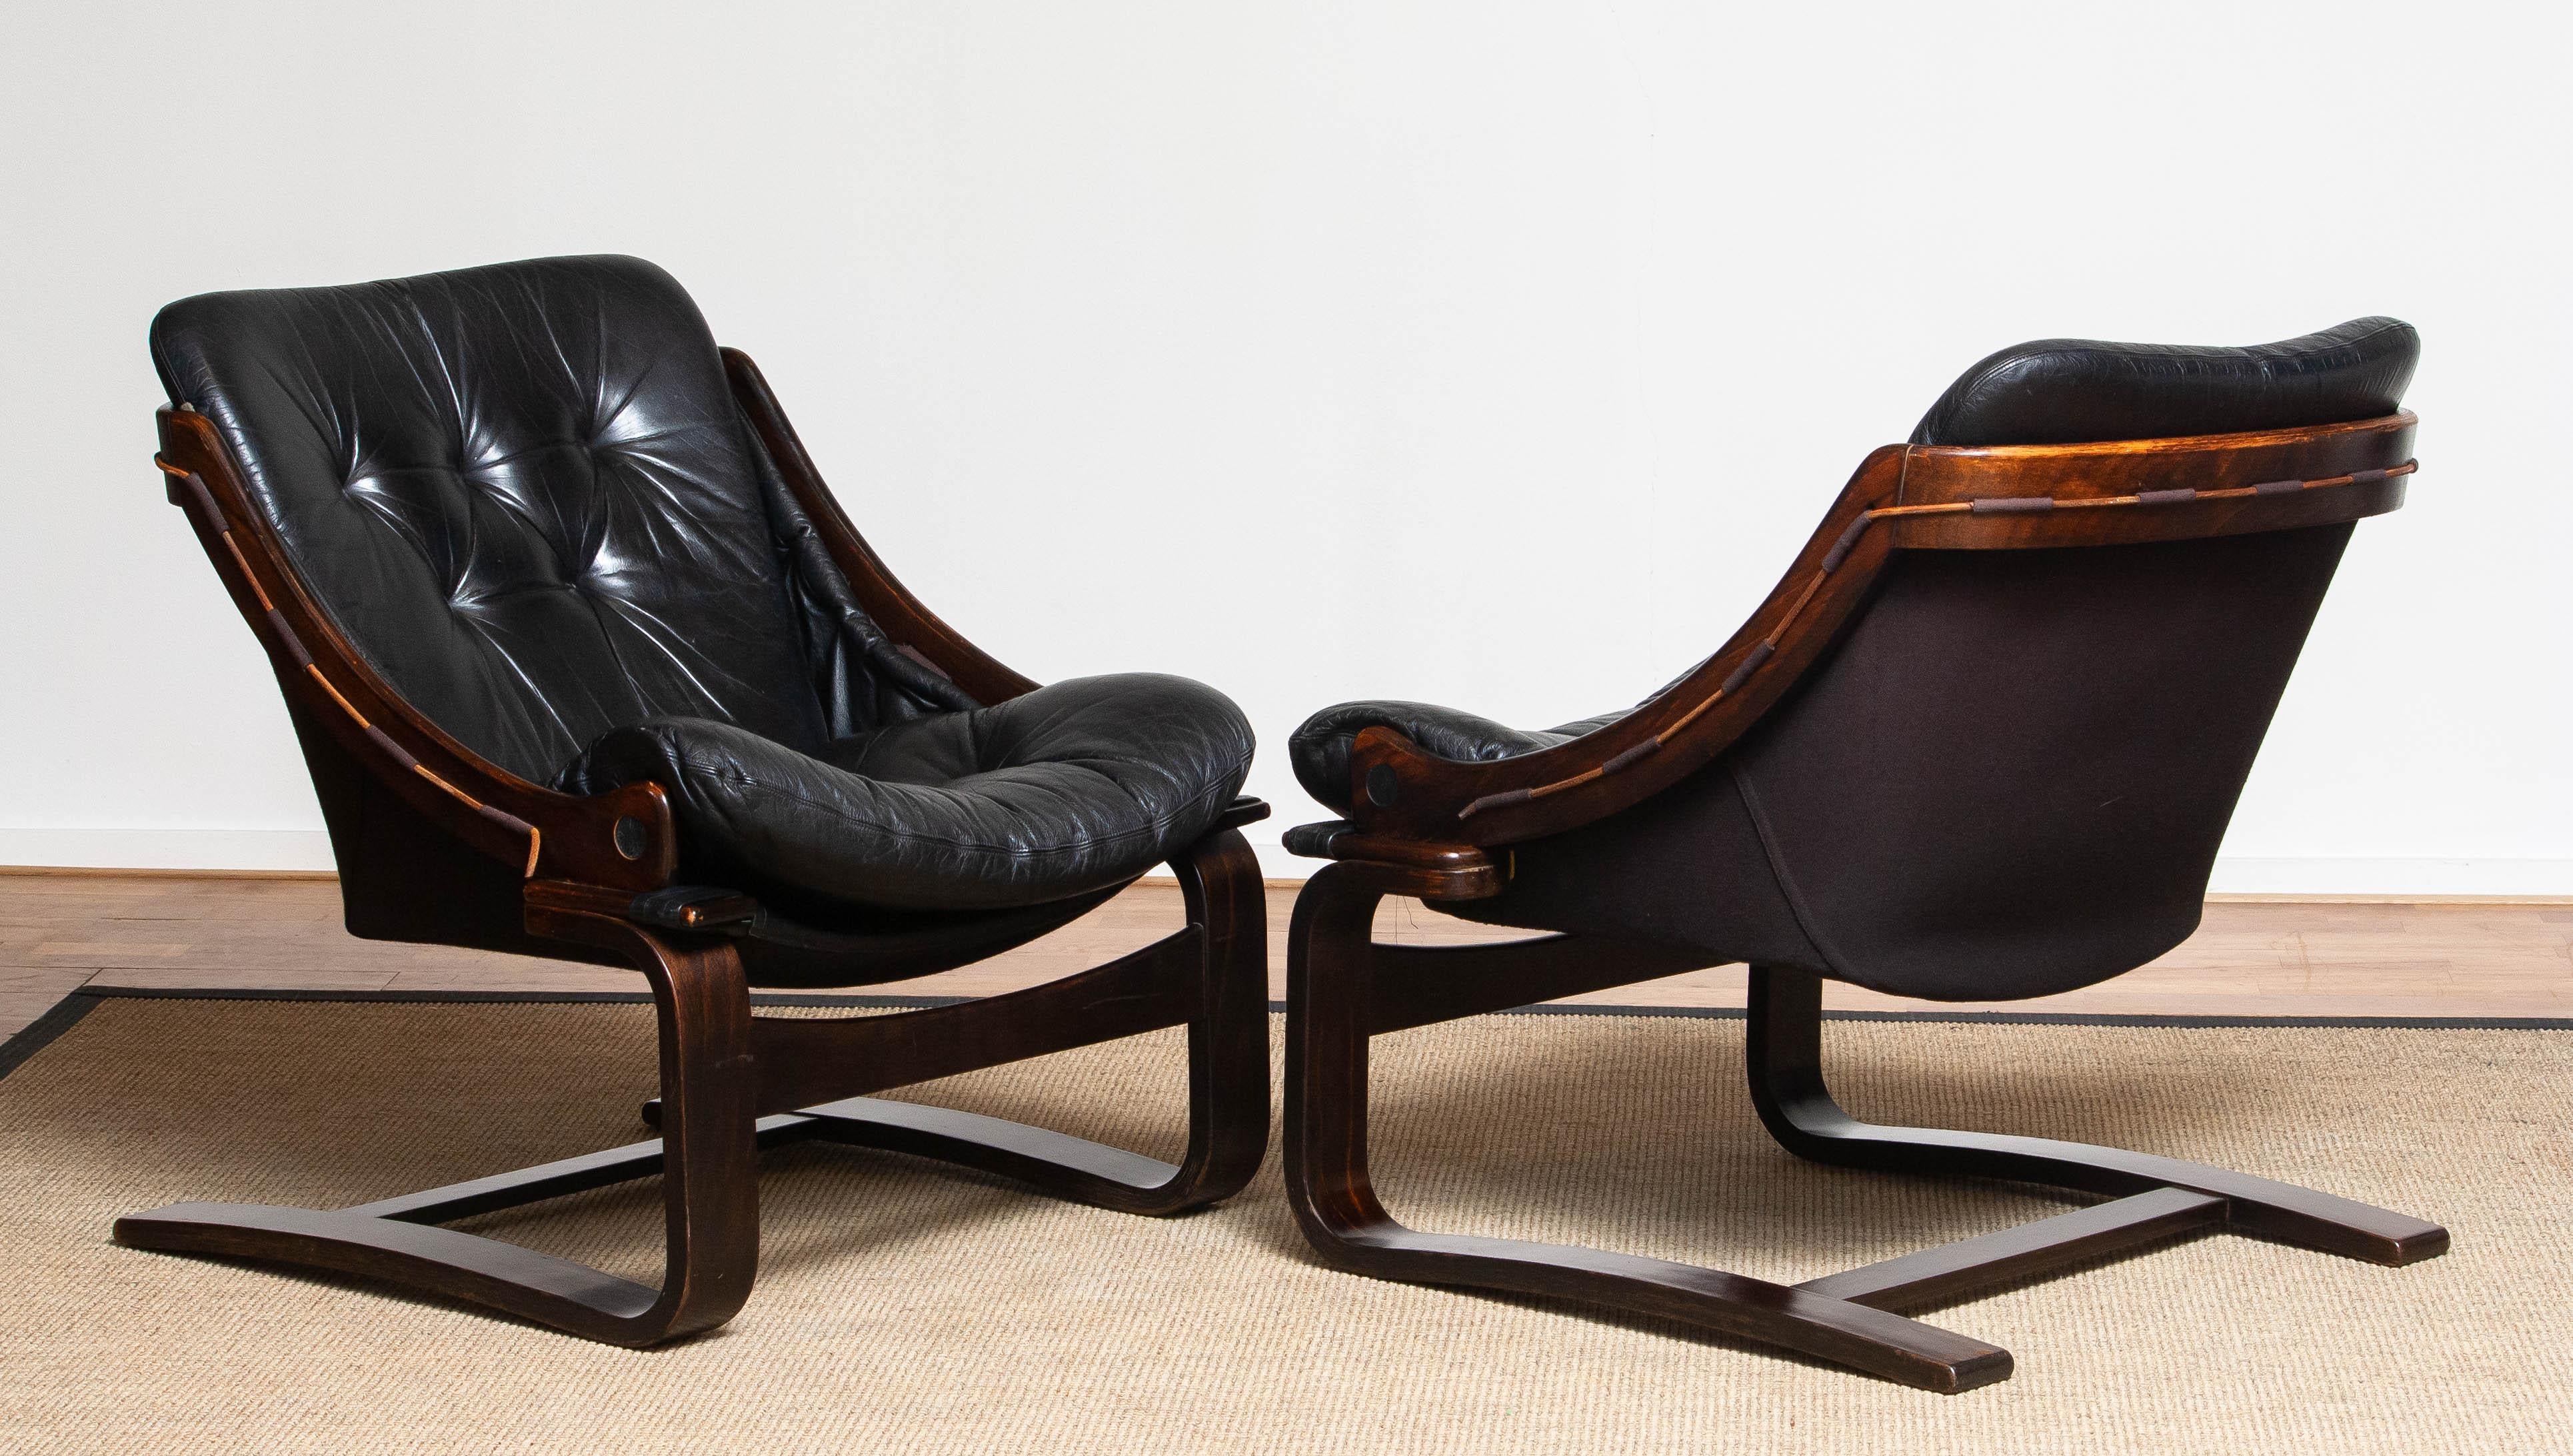 1970's Pair Black Leather Club / Lounge Chairs by Ake Fribytter for Nelo Sweden 2